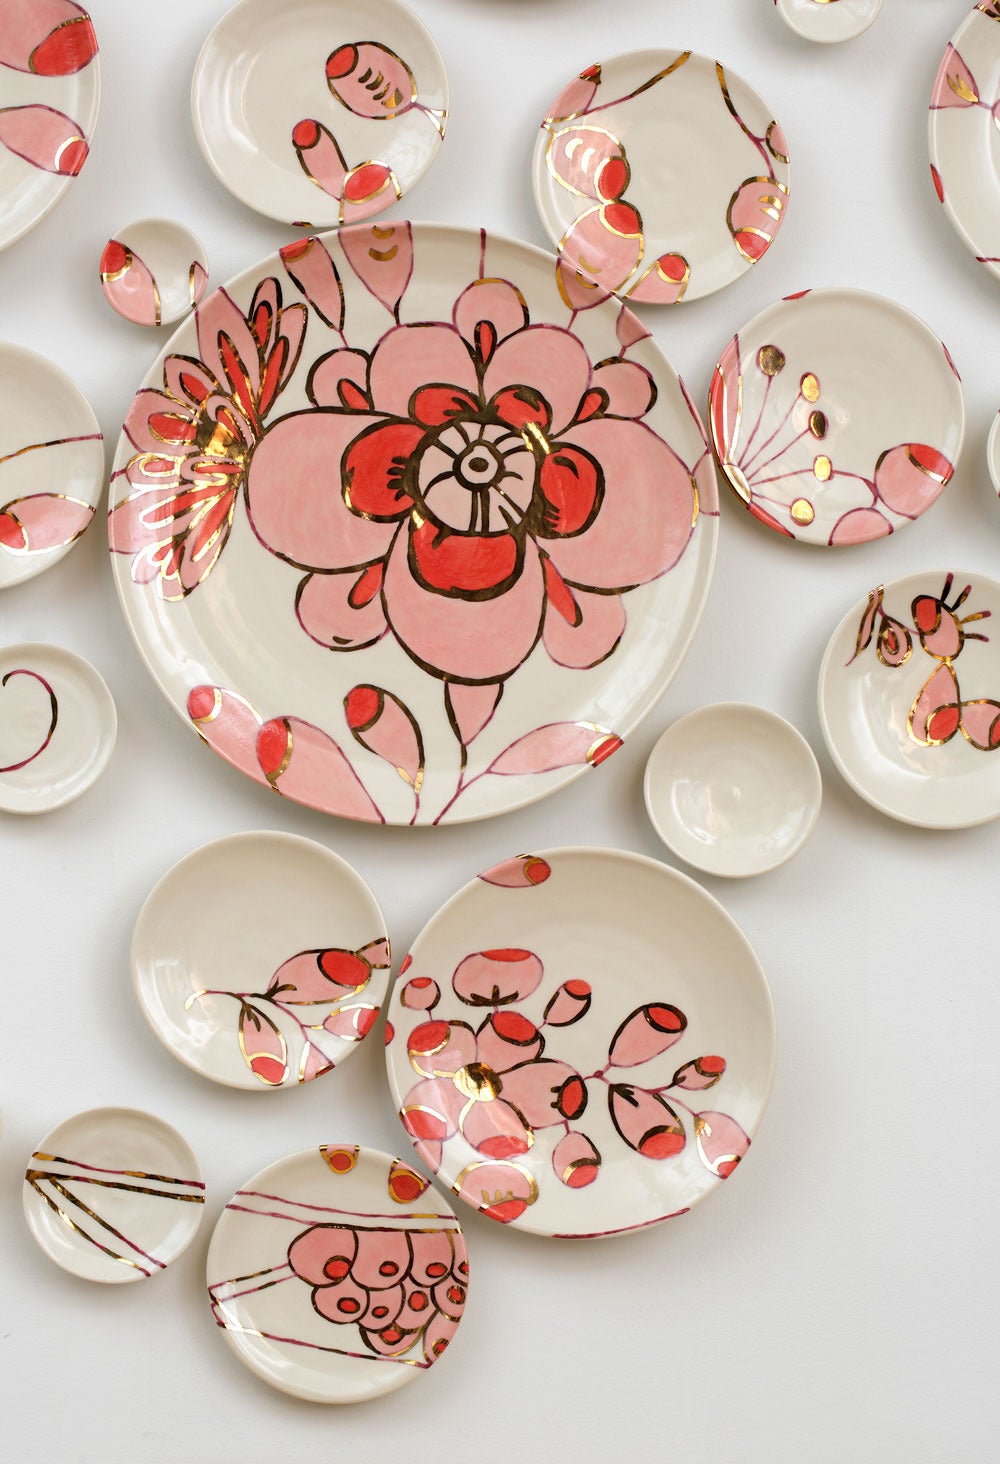 Aspire is Molly Hatch’s newest plate painting made sourcing the iconic Meissen Porcelain Manufacturer’s Purple Indian tableware pattern. Aspire is the second in an ongoing series of works by Hatch that explores the relationship between the historic